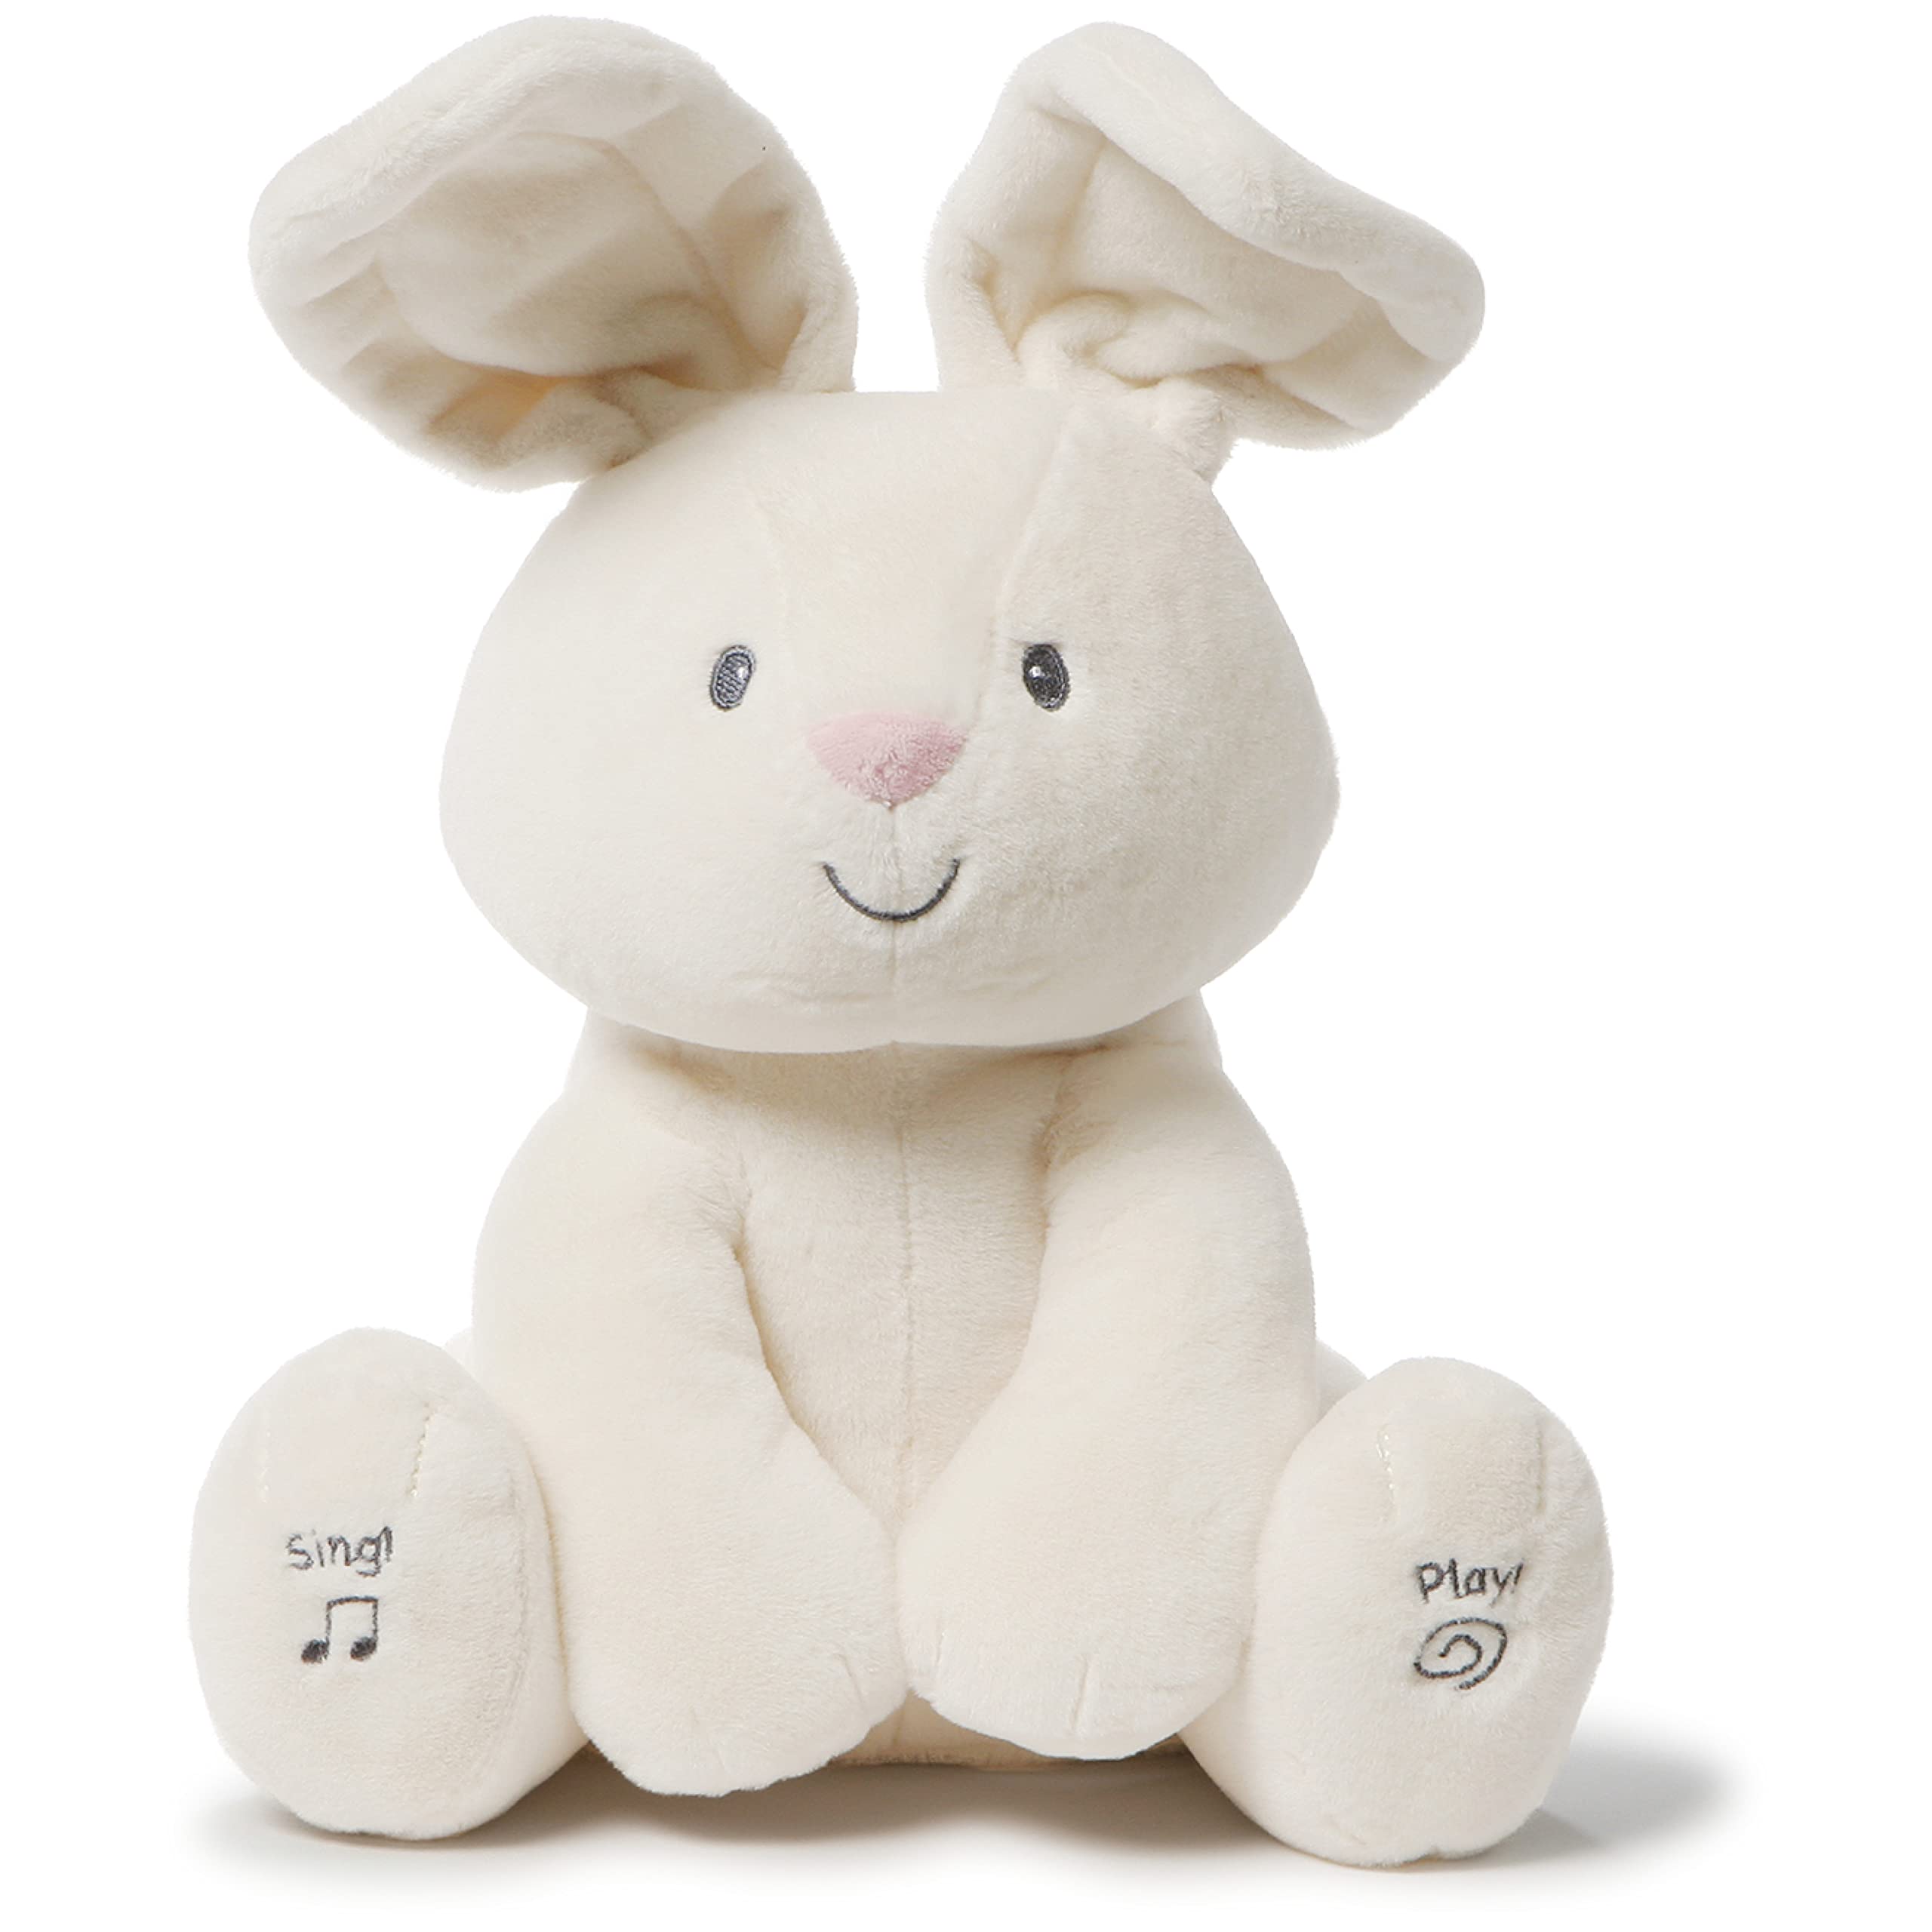 GUND Baby Flora The Bunny Animated Plush, Singing Stuffed Animal Toy for Ages 0 and Up, Cream, 12